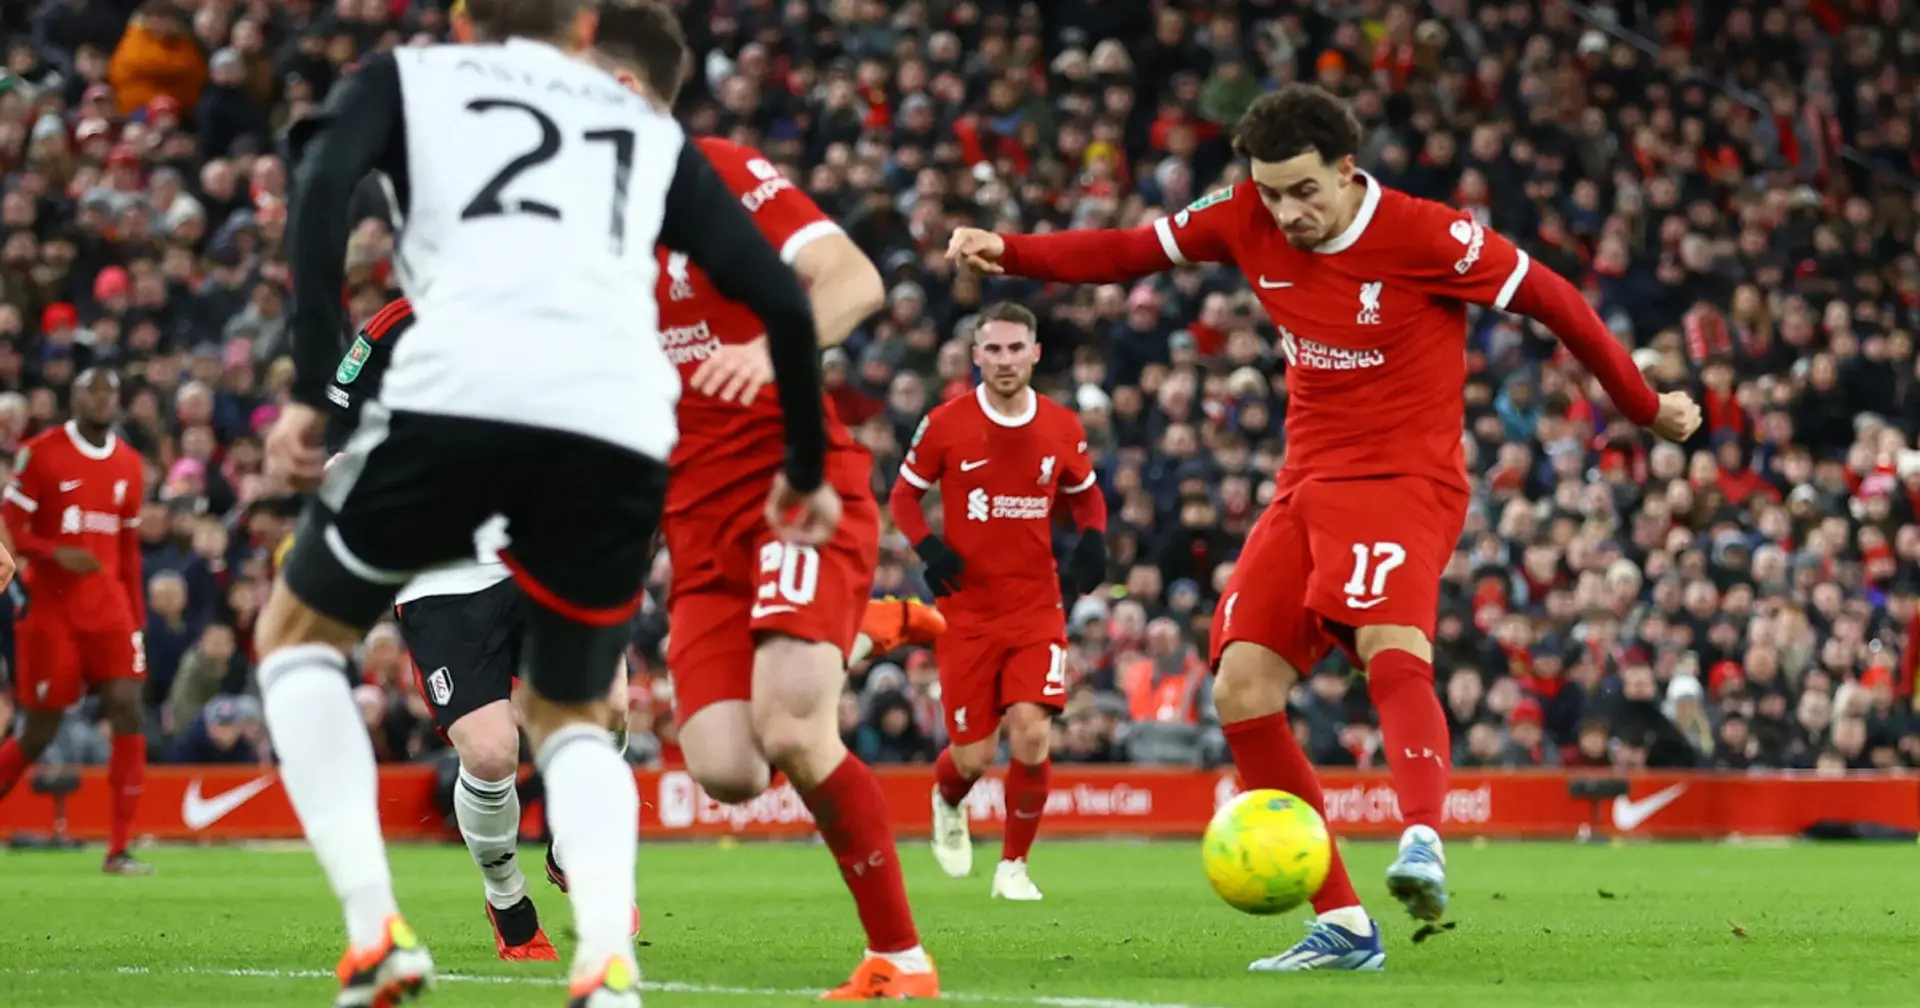 Return Fulham leg on Wednesday: a look at Liverpool's next 5 games